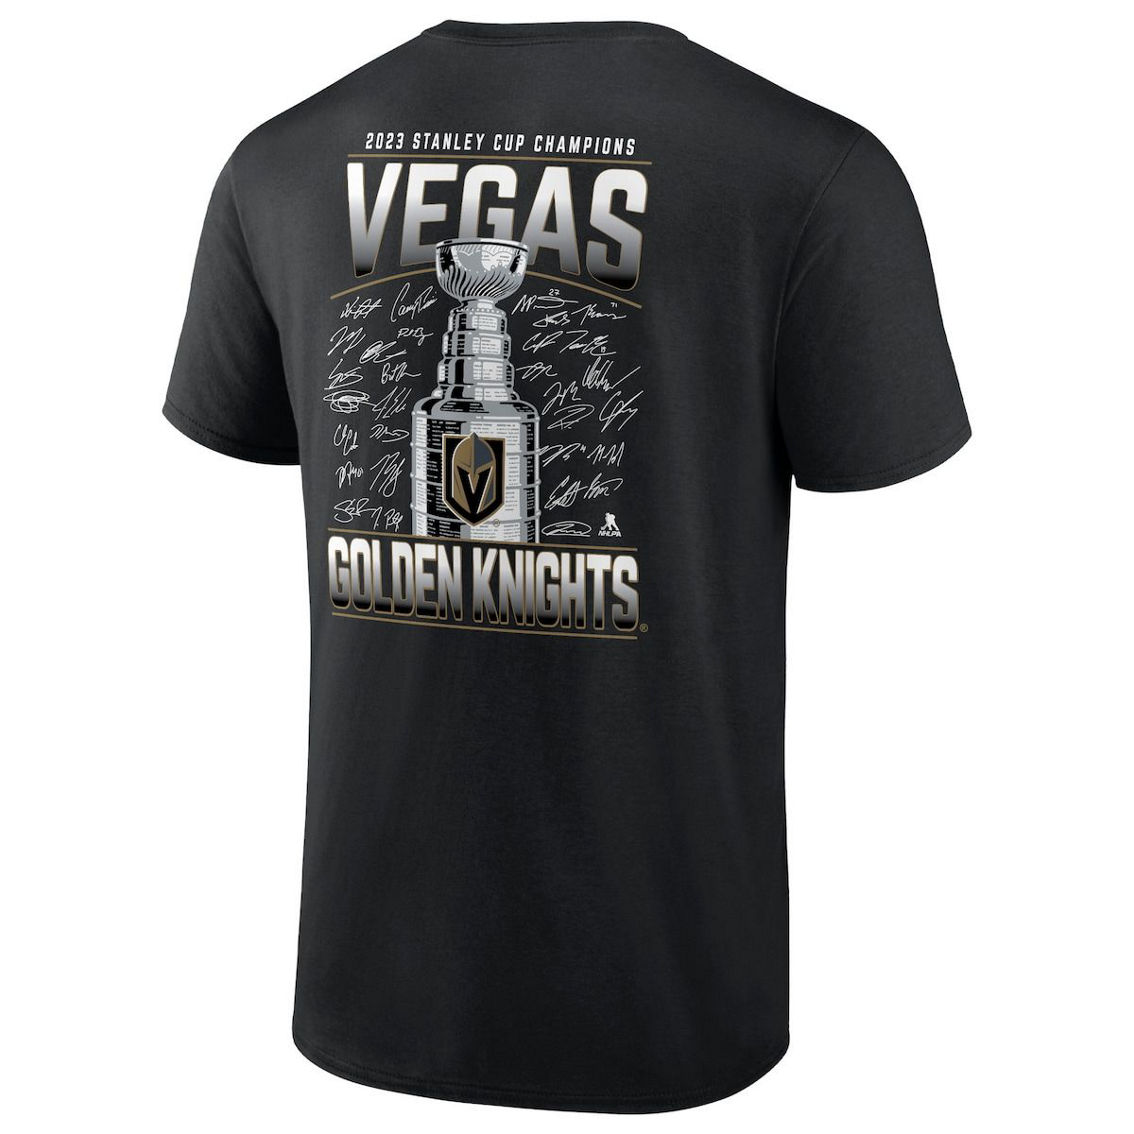 Fanatics Branded Men's Black Vegas Golden Knights 2023 Stanley Cup s Signature Roster T-Shirt - Image 4 of 4